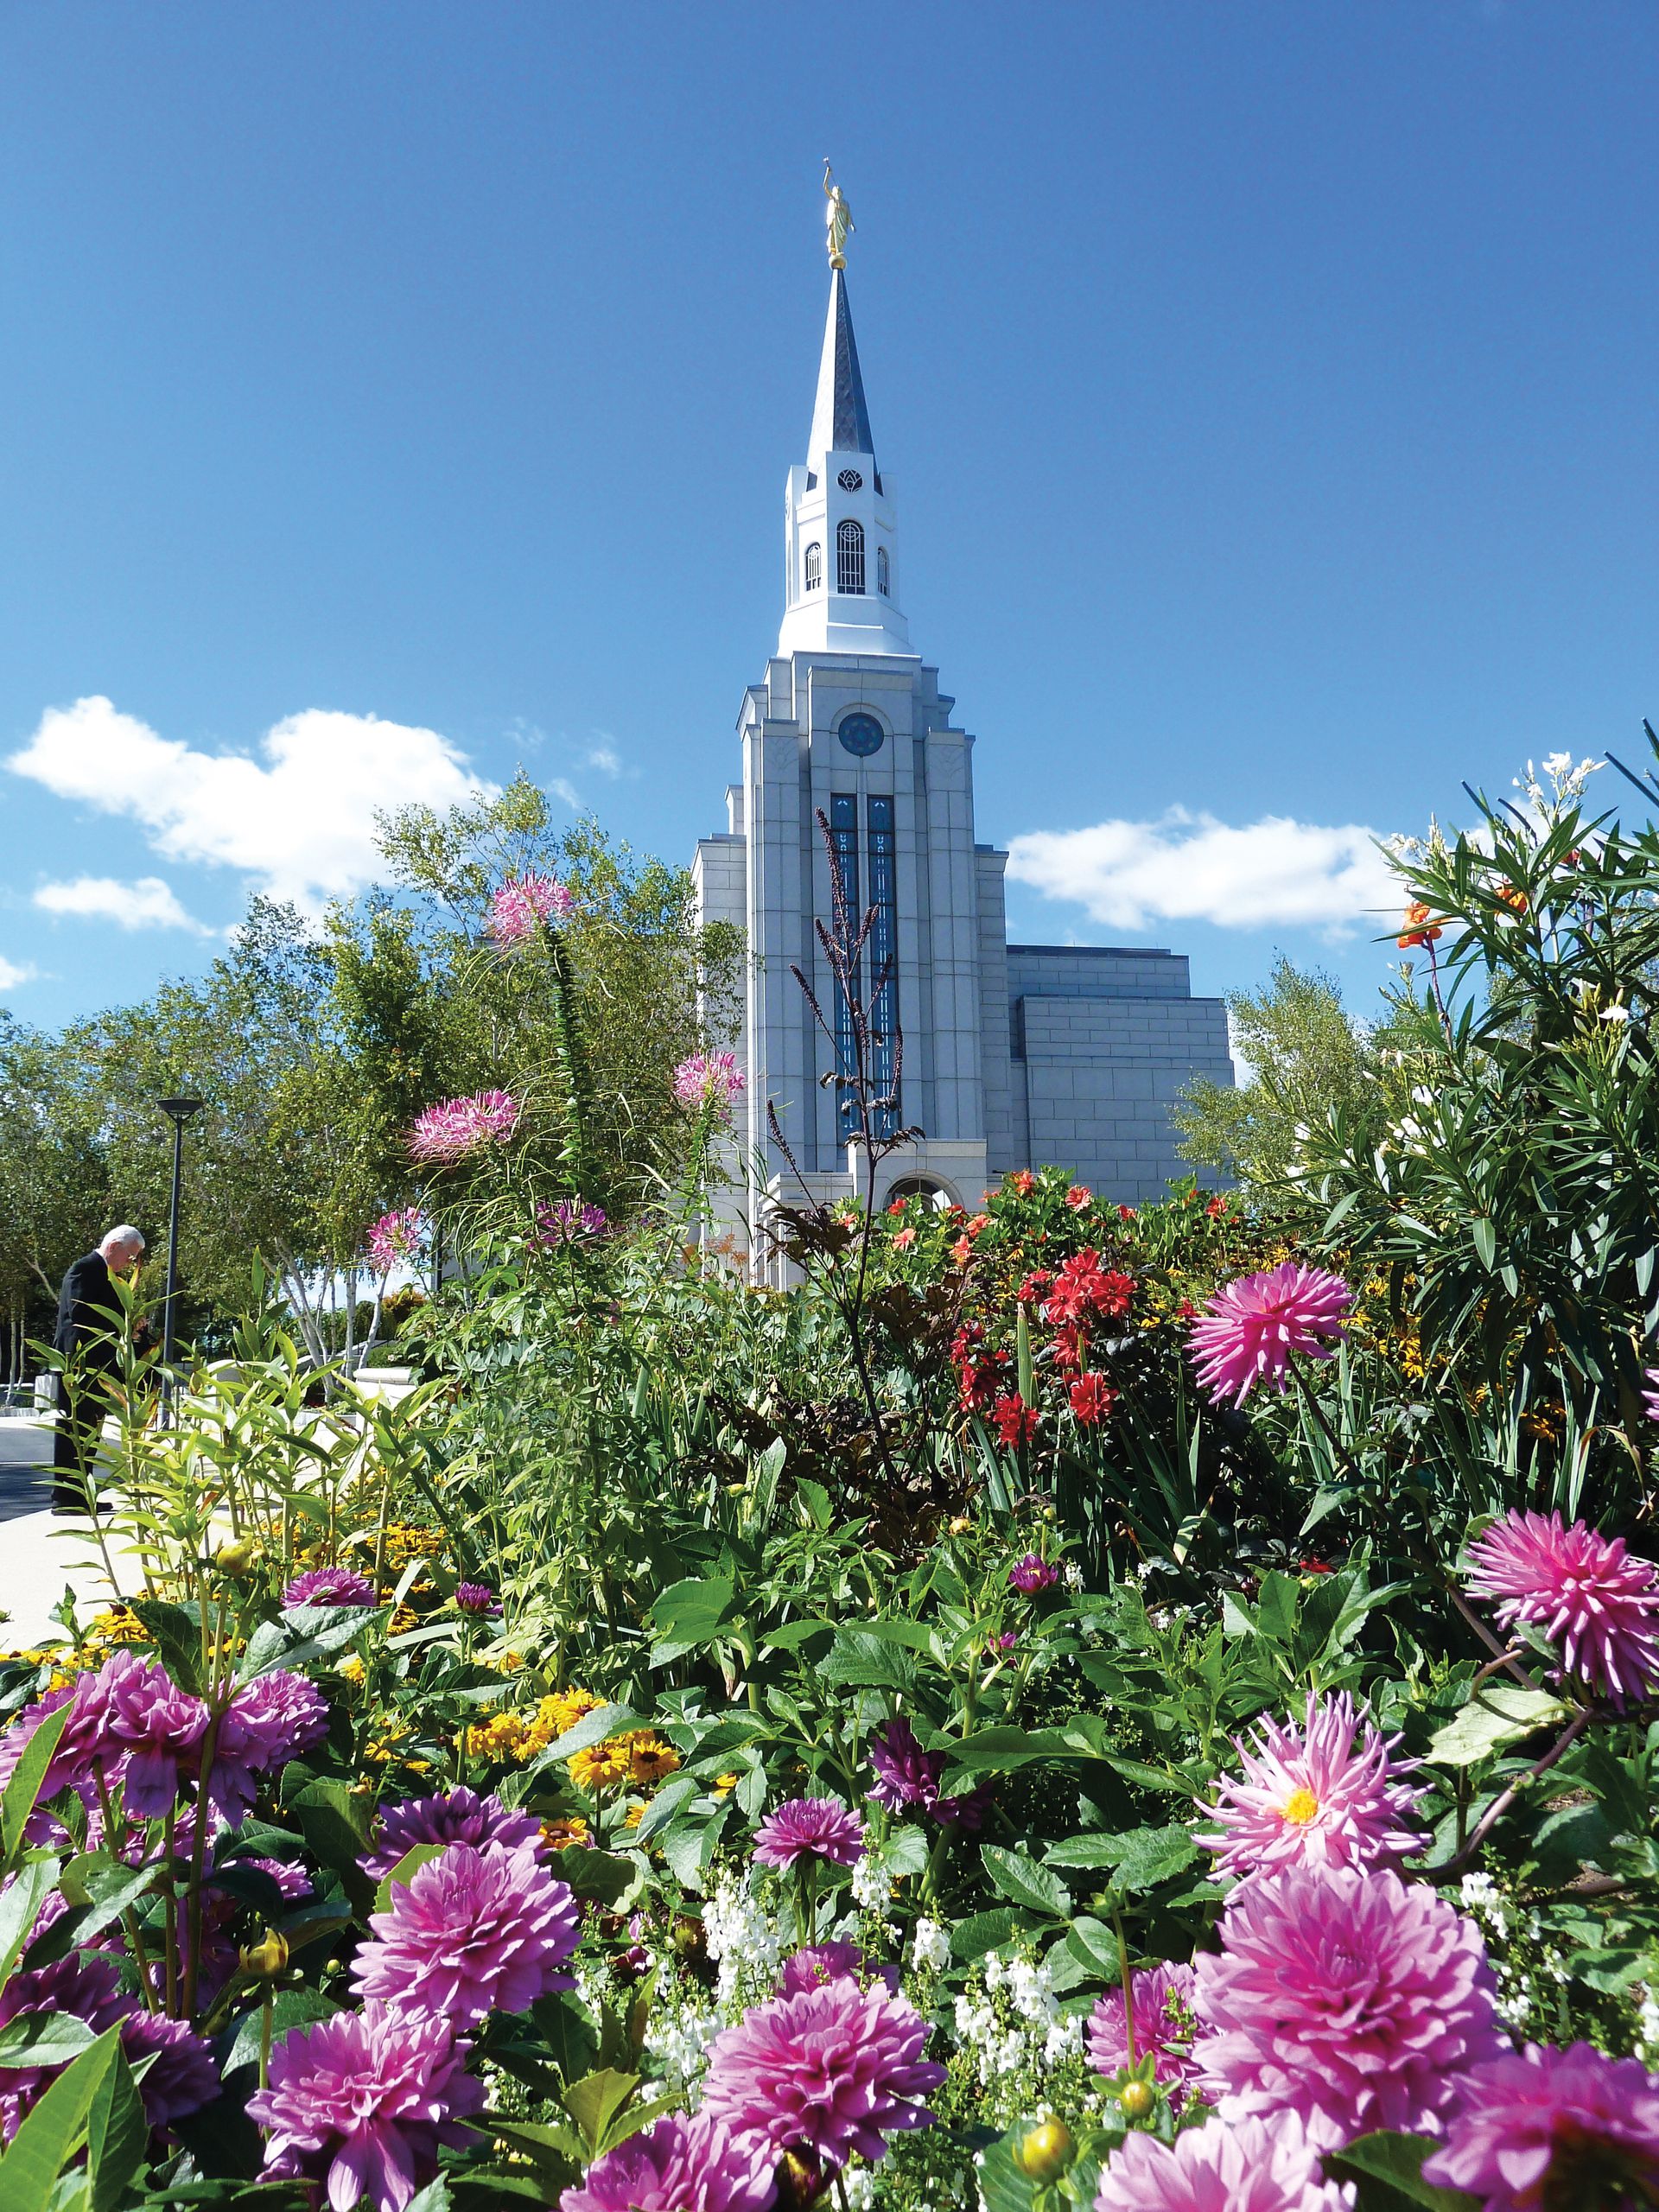 Flowers in the foreground of the Boston Massachusetts Temple.